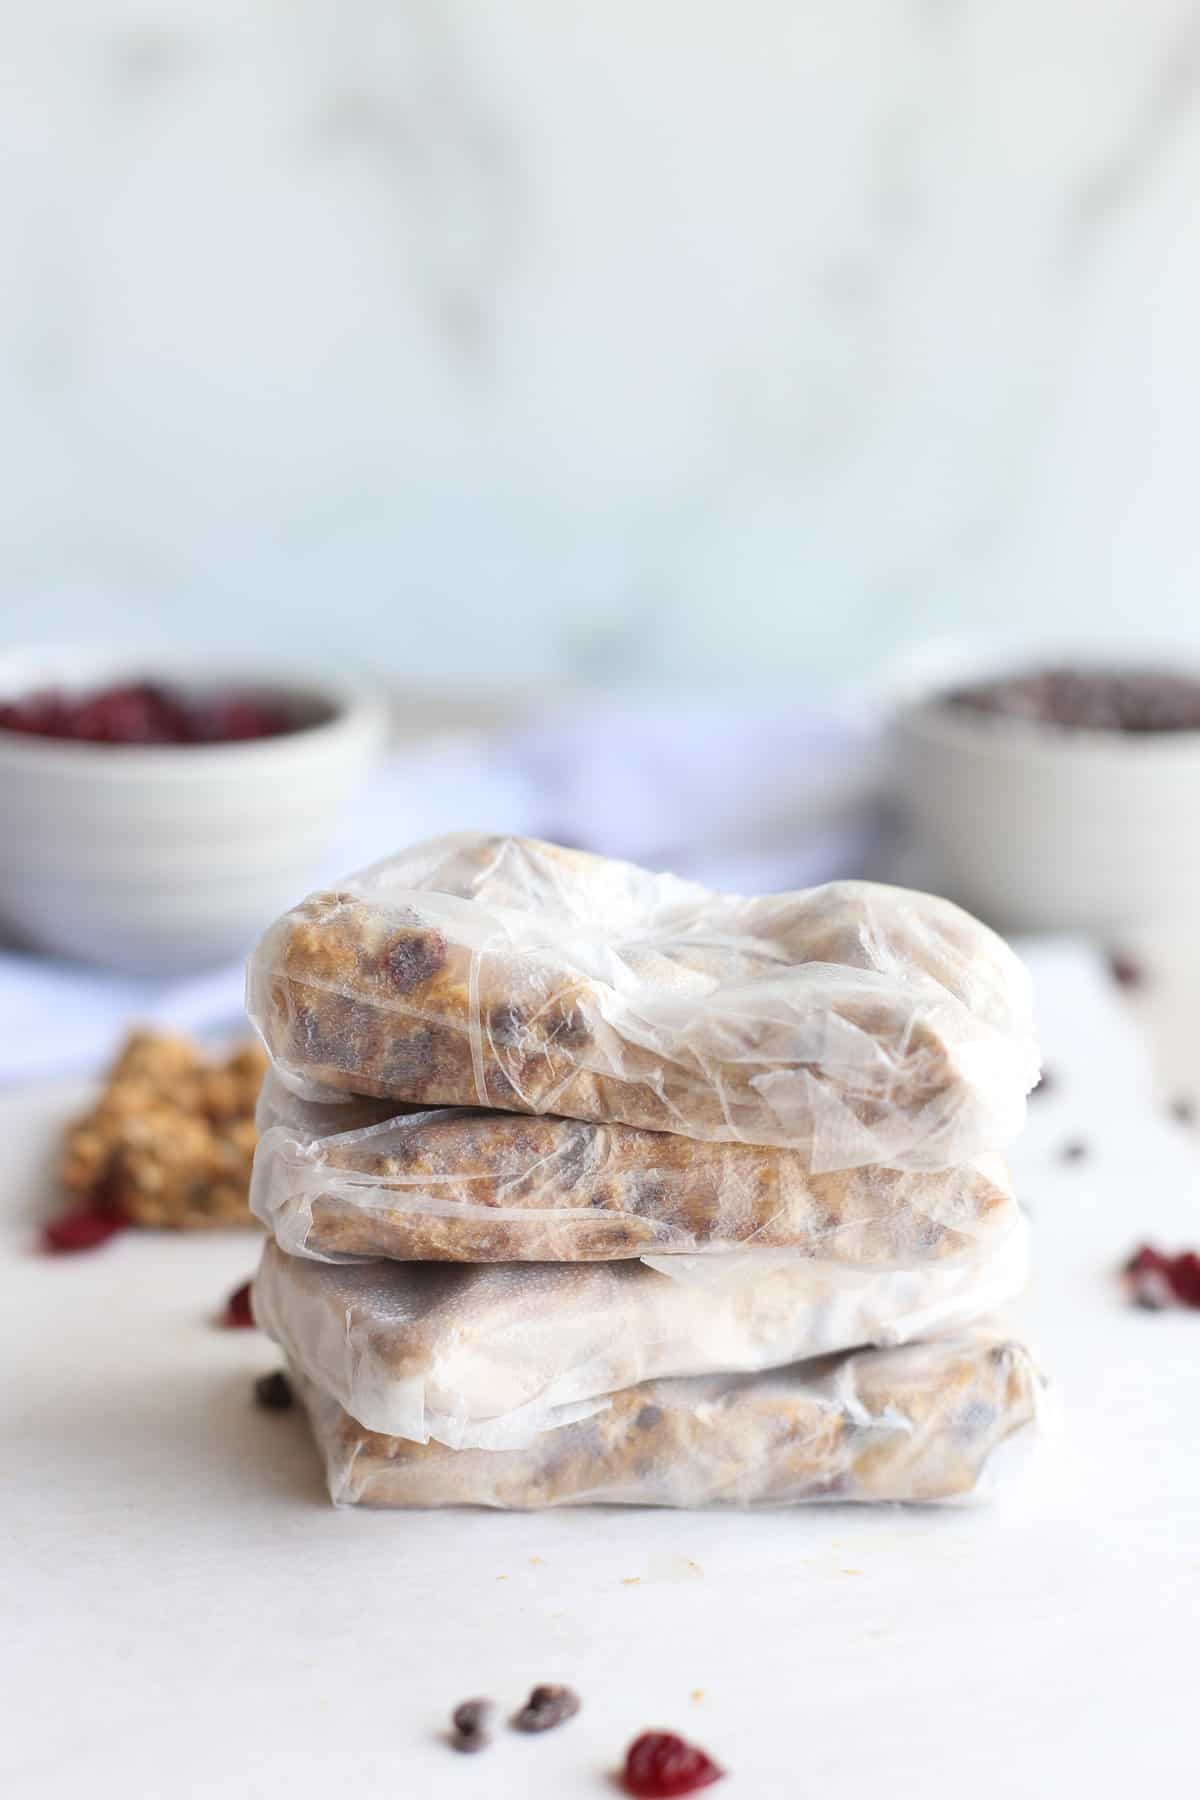 Homemade peanut butter protein bars wrapped individually in plastic baggies for storing.